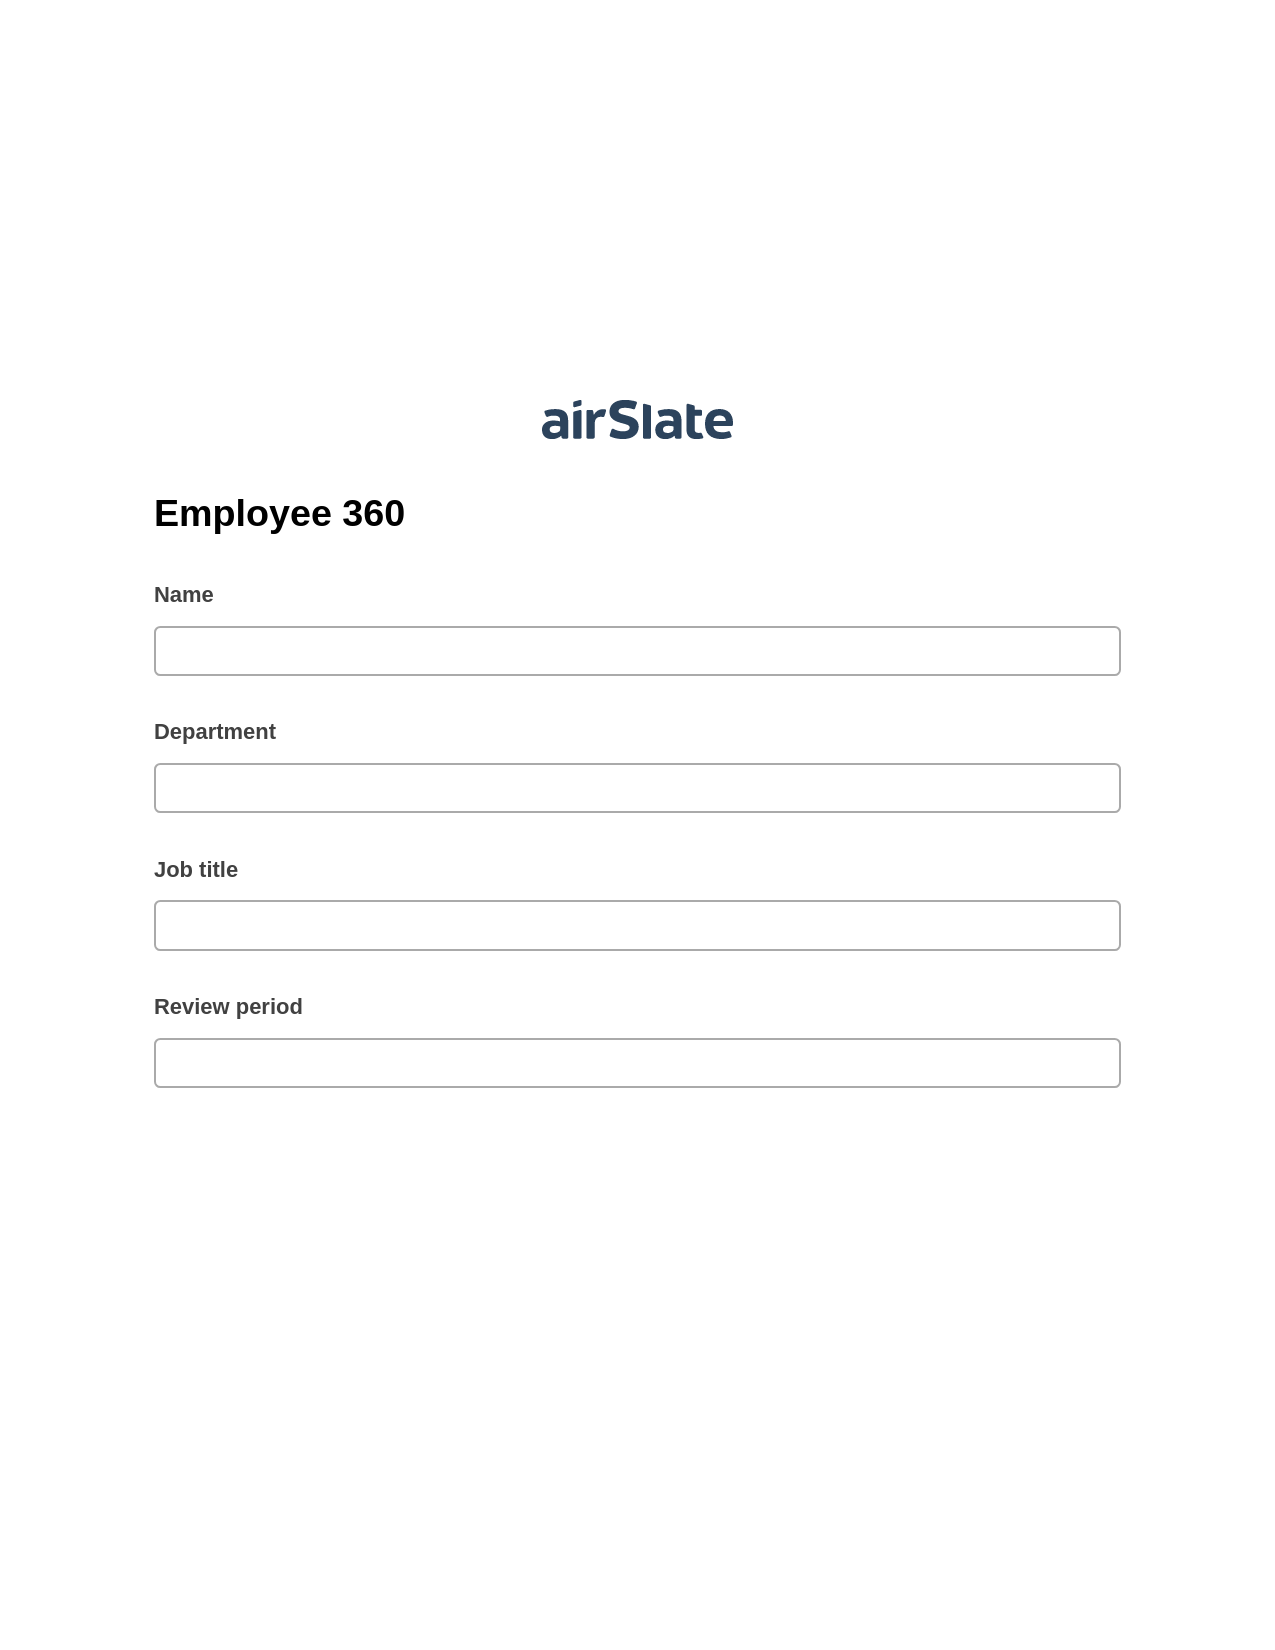 Multirole Employee 360 Pre-fill from Salesforce Records with SOQL Bot, Google Calendar Bot, Archive to SharePoint Folder Bot